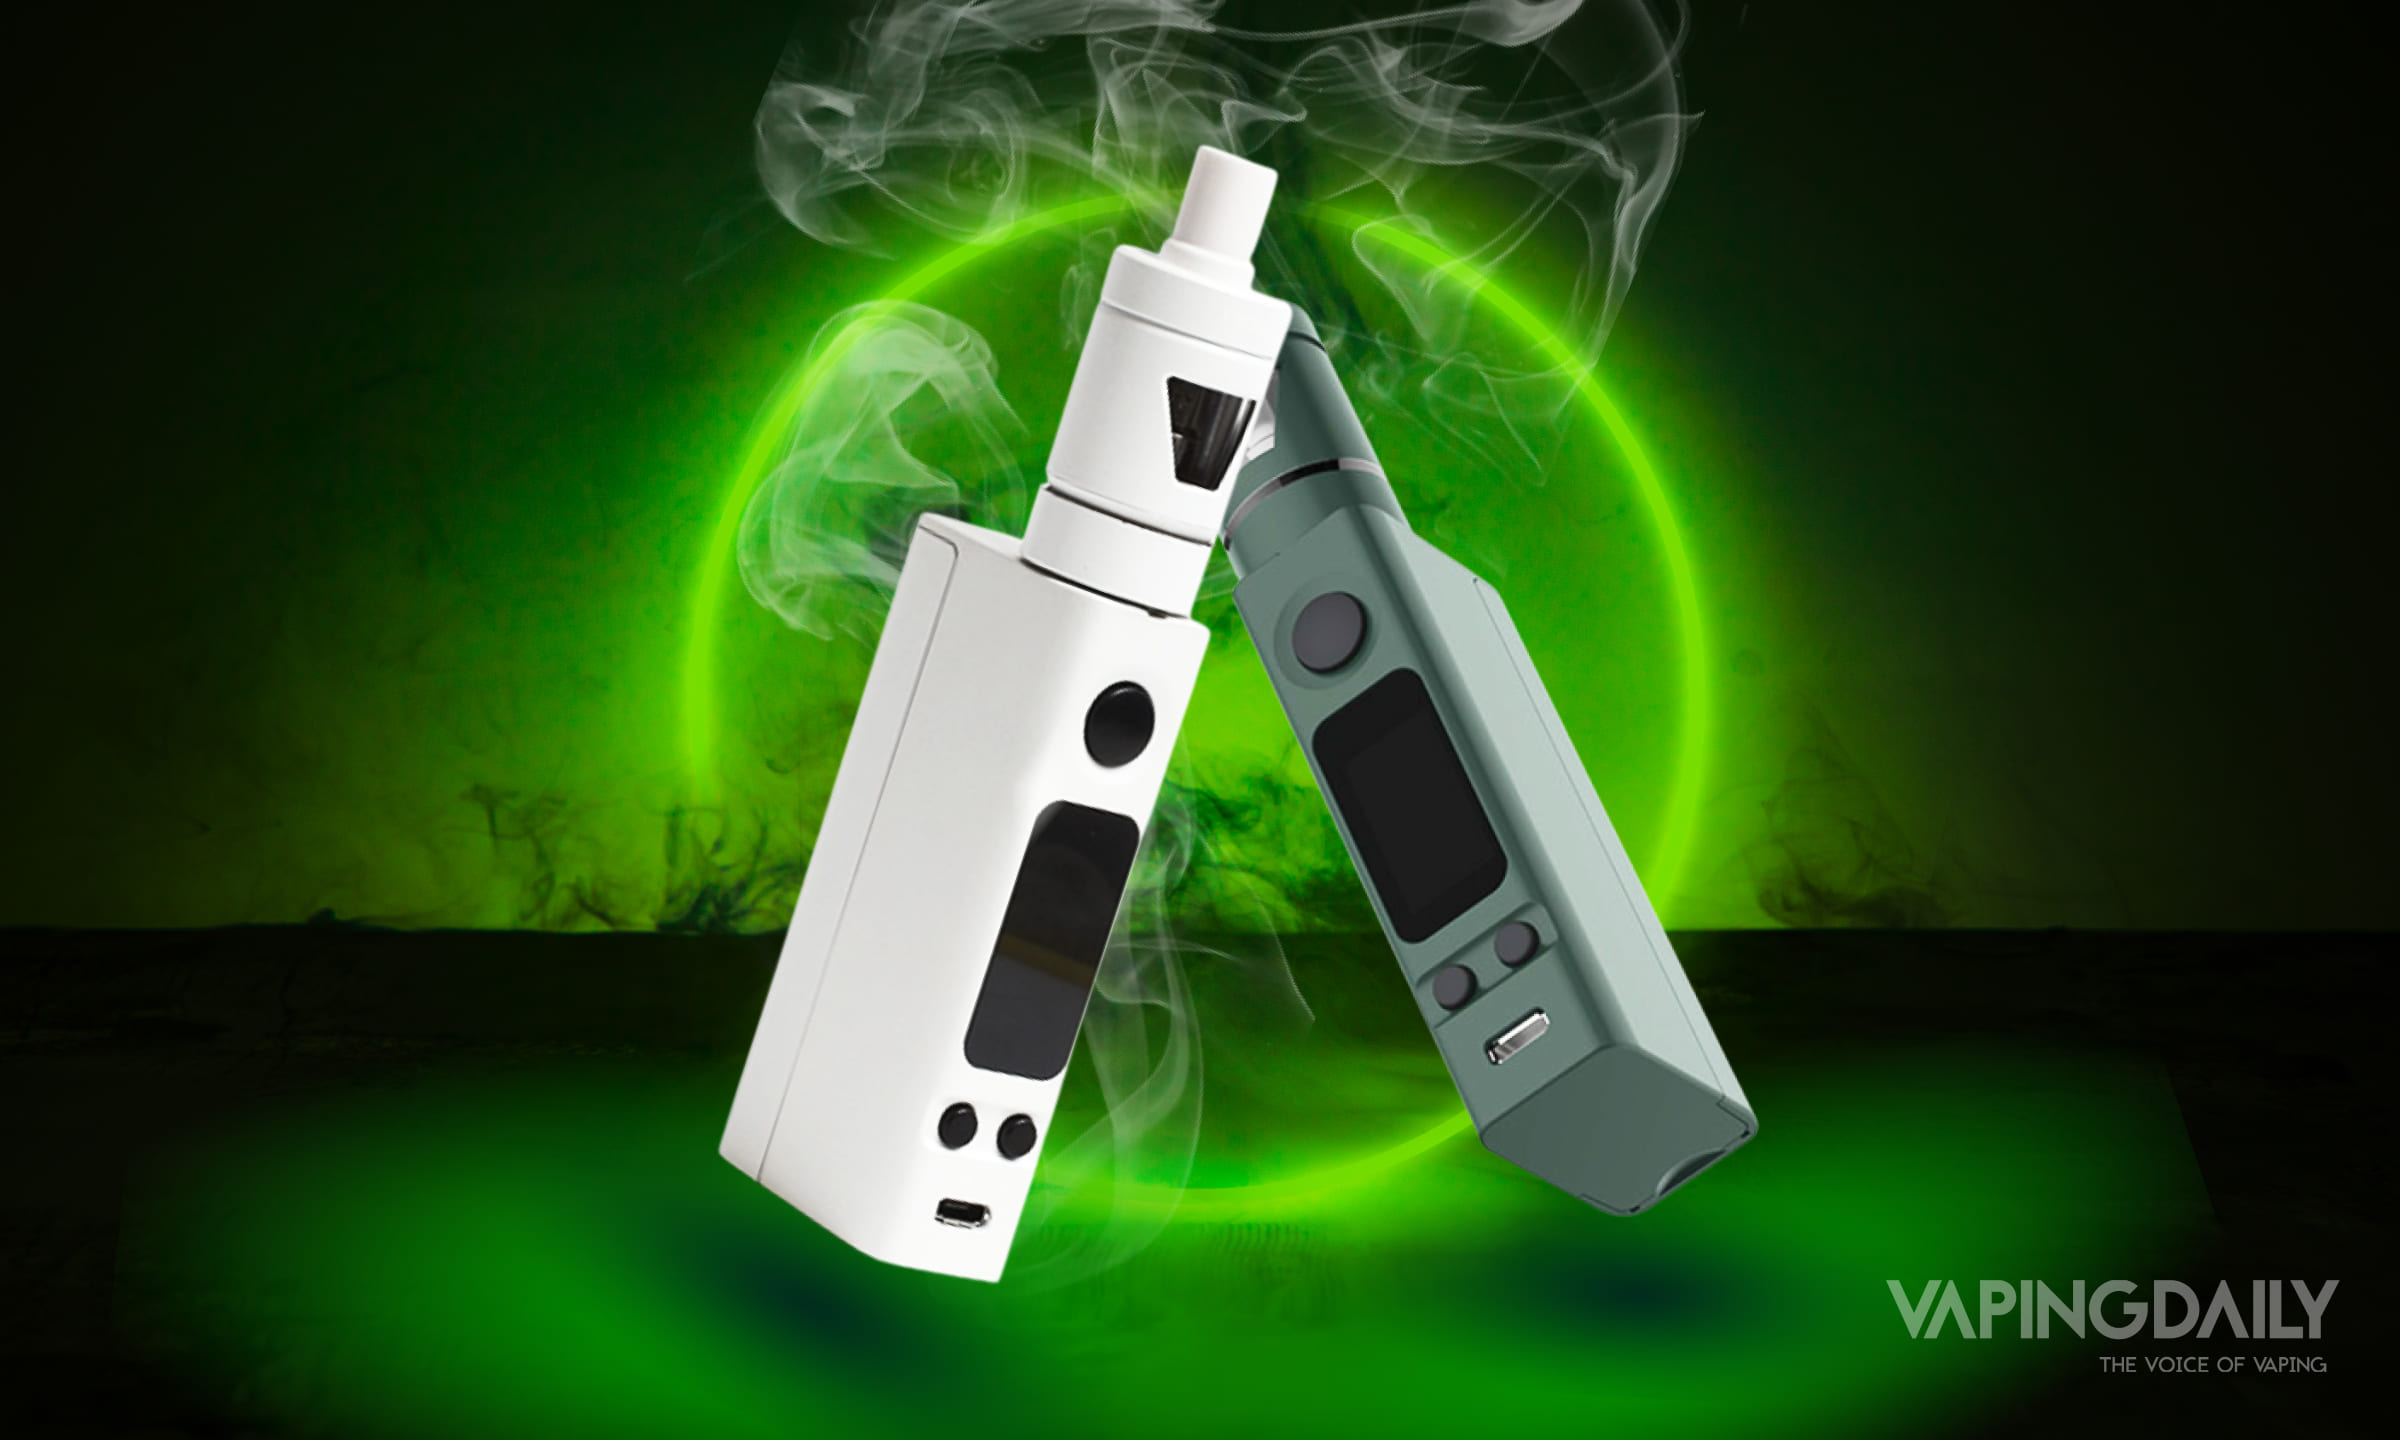 The eVic VTC Mini 75w: Is it Worth Buying?